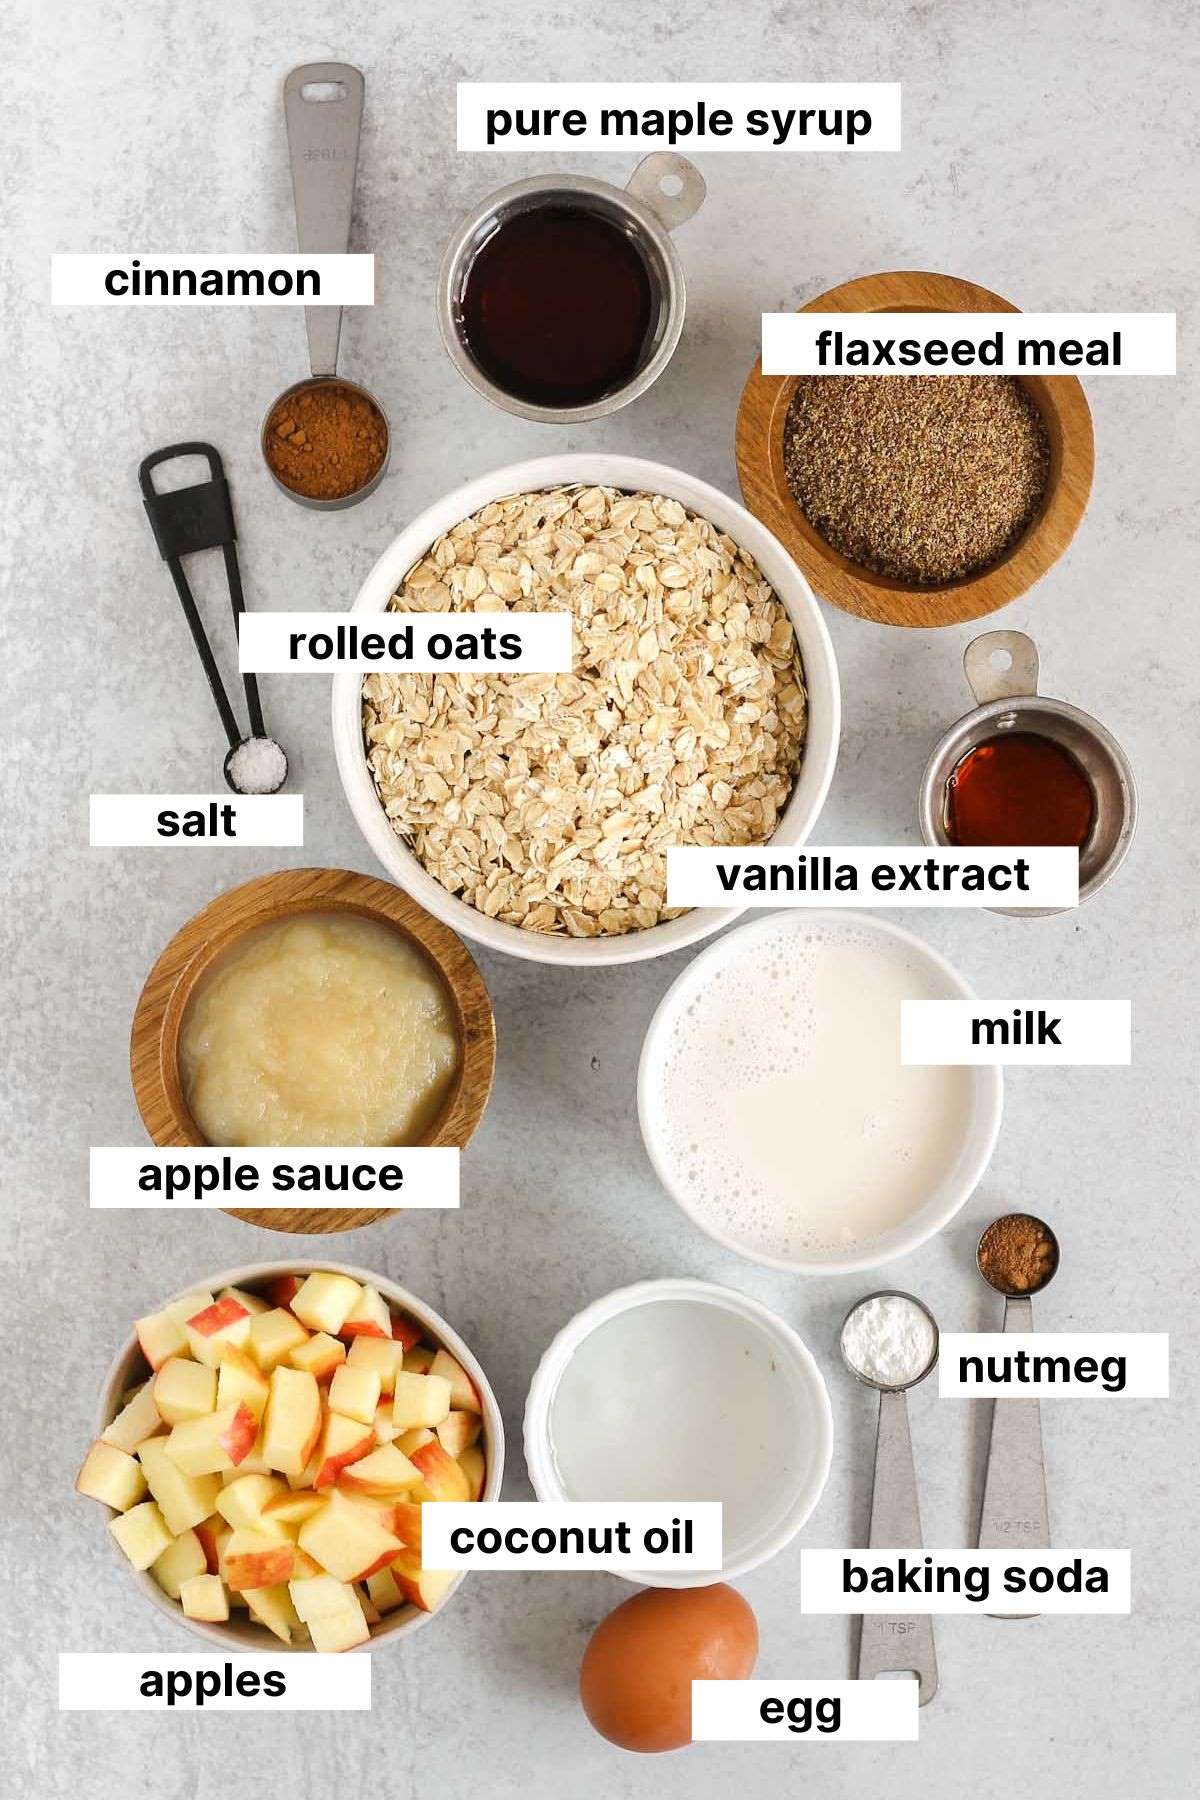 Labeled ingredients for apple cinnamon baked oatmeal.